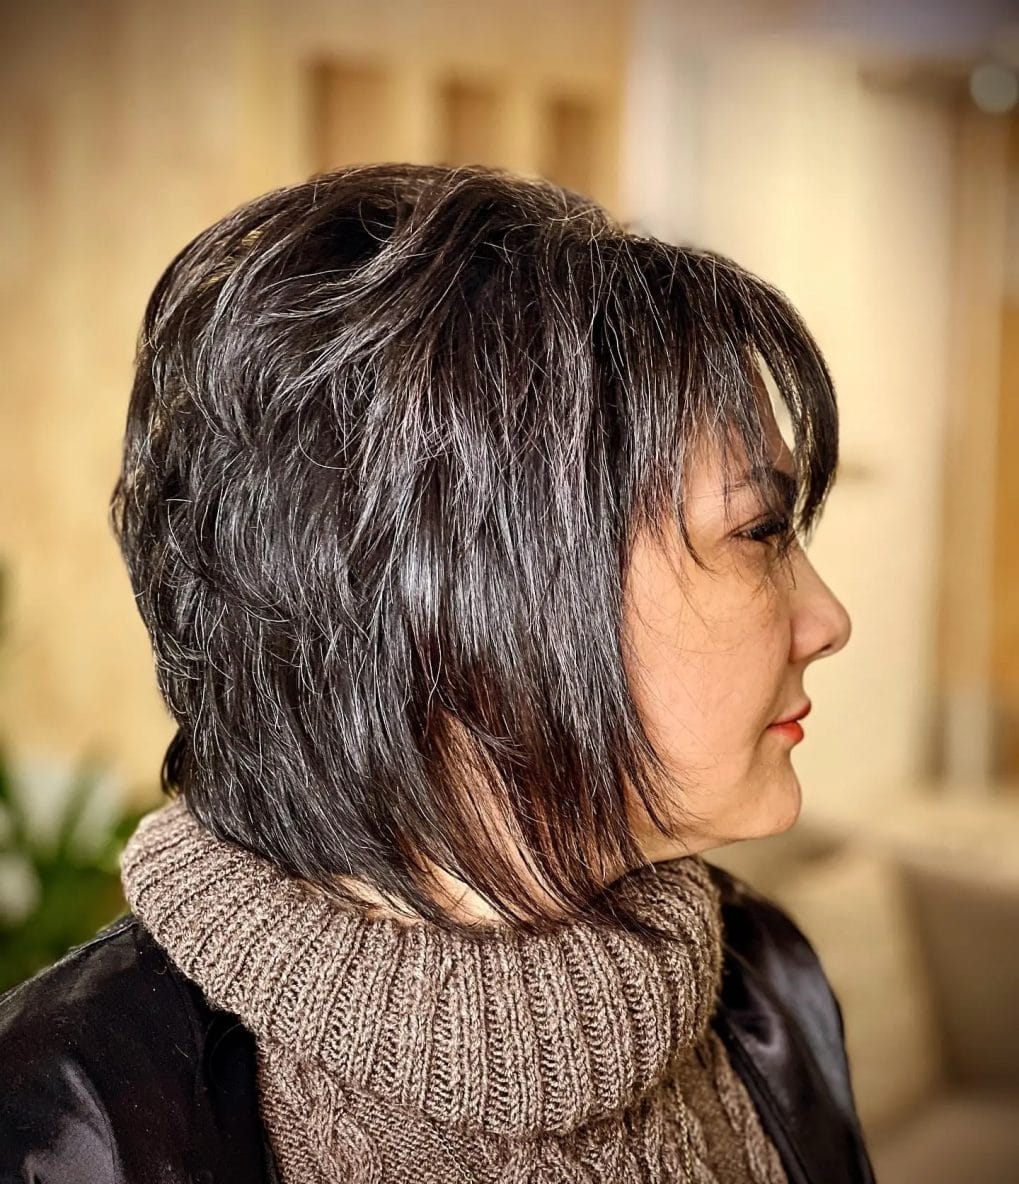 Natural dark tousled pixie bob with lengthier strands at the front framing the face